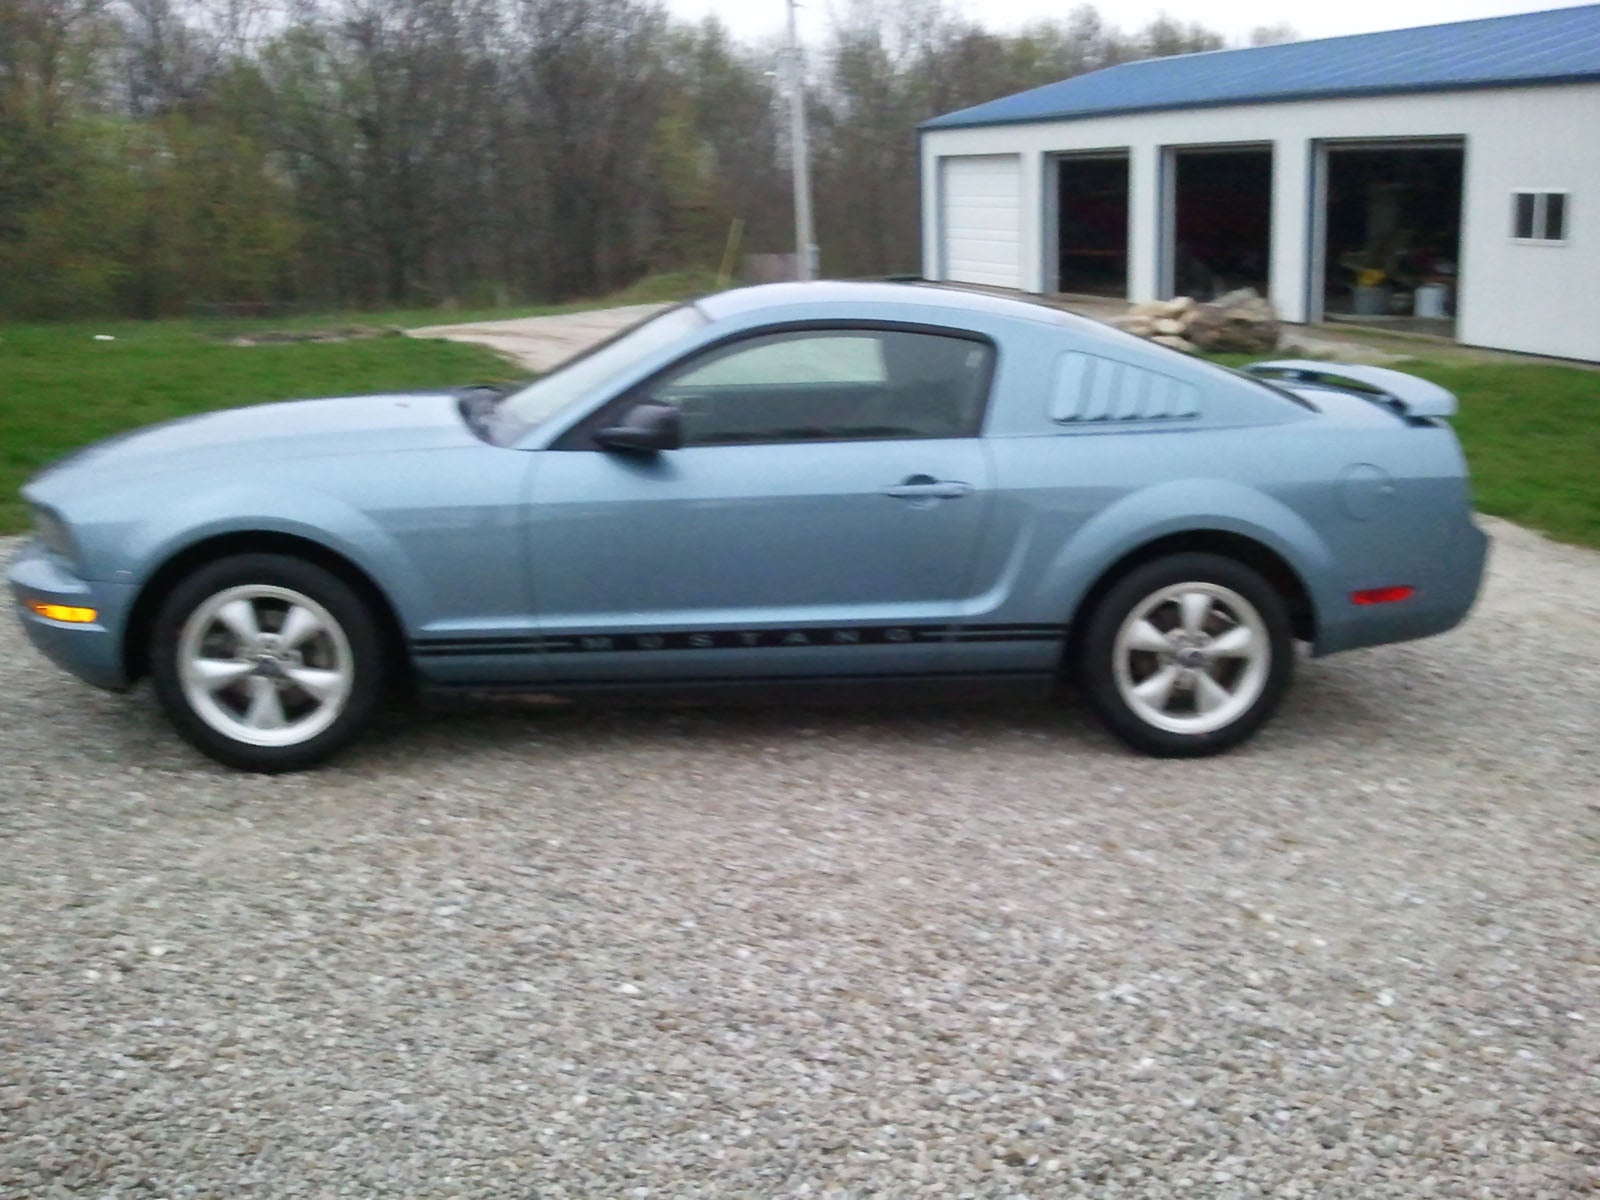 2005 Ford mustang sale missouri #7